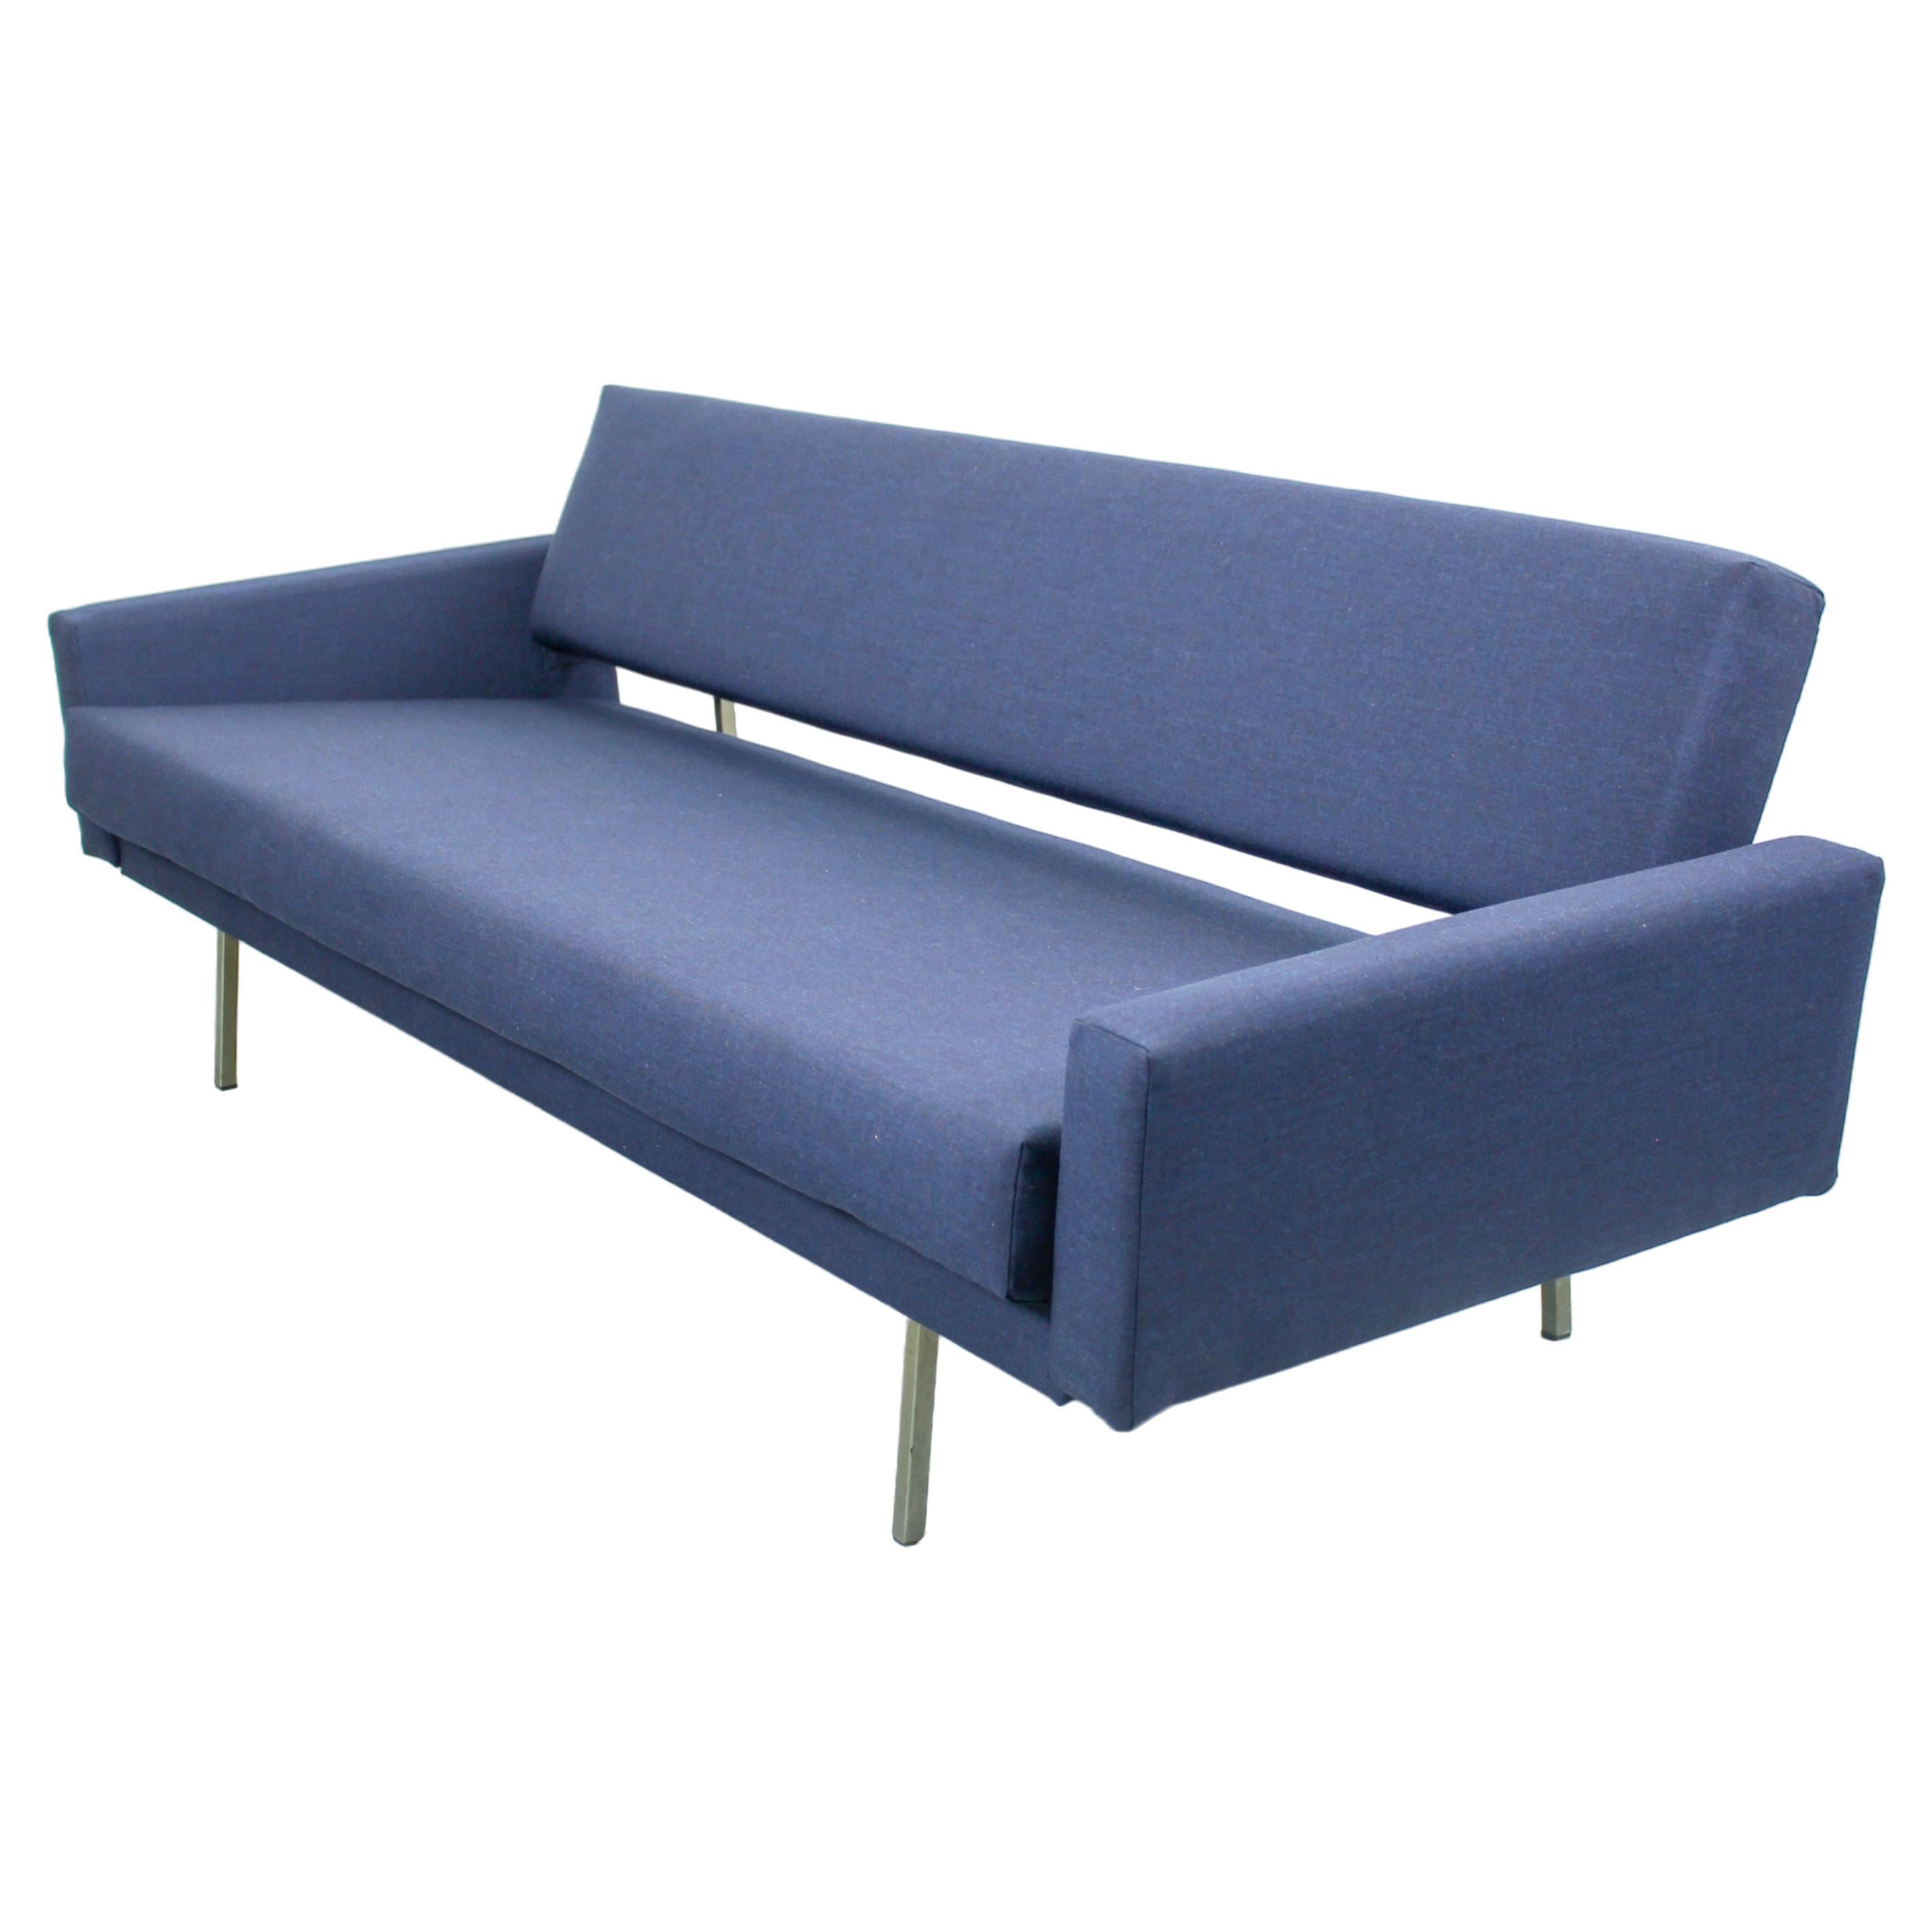 Sofa/ Daybed by Rob Parry for Gelderland, Netherlands, 1950s For Sale